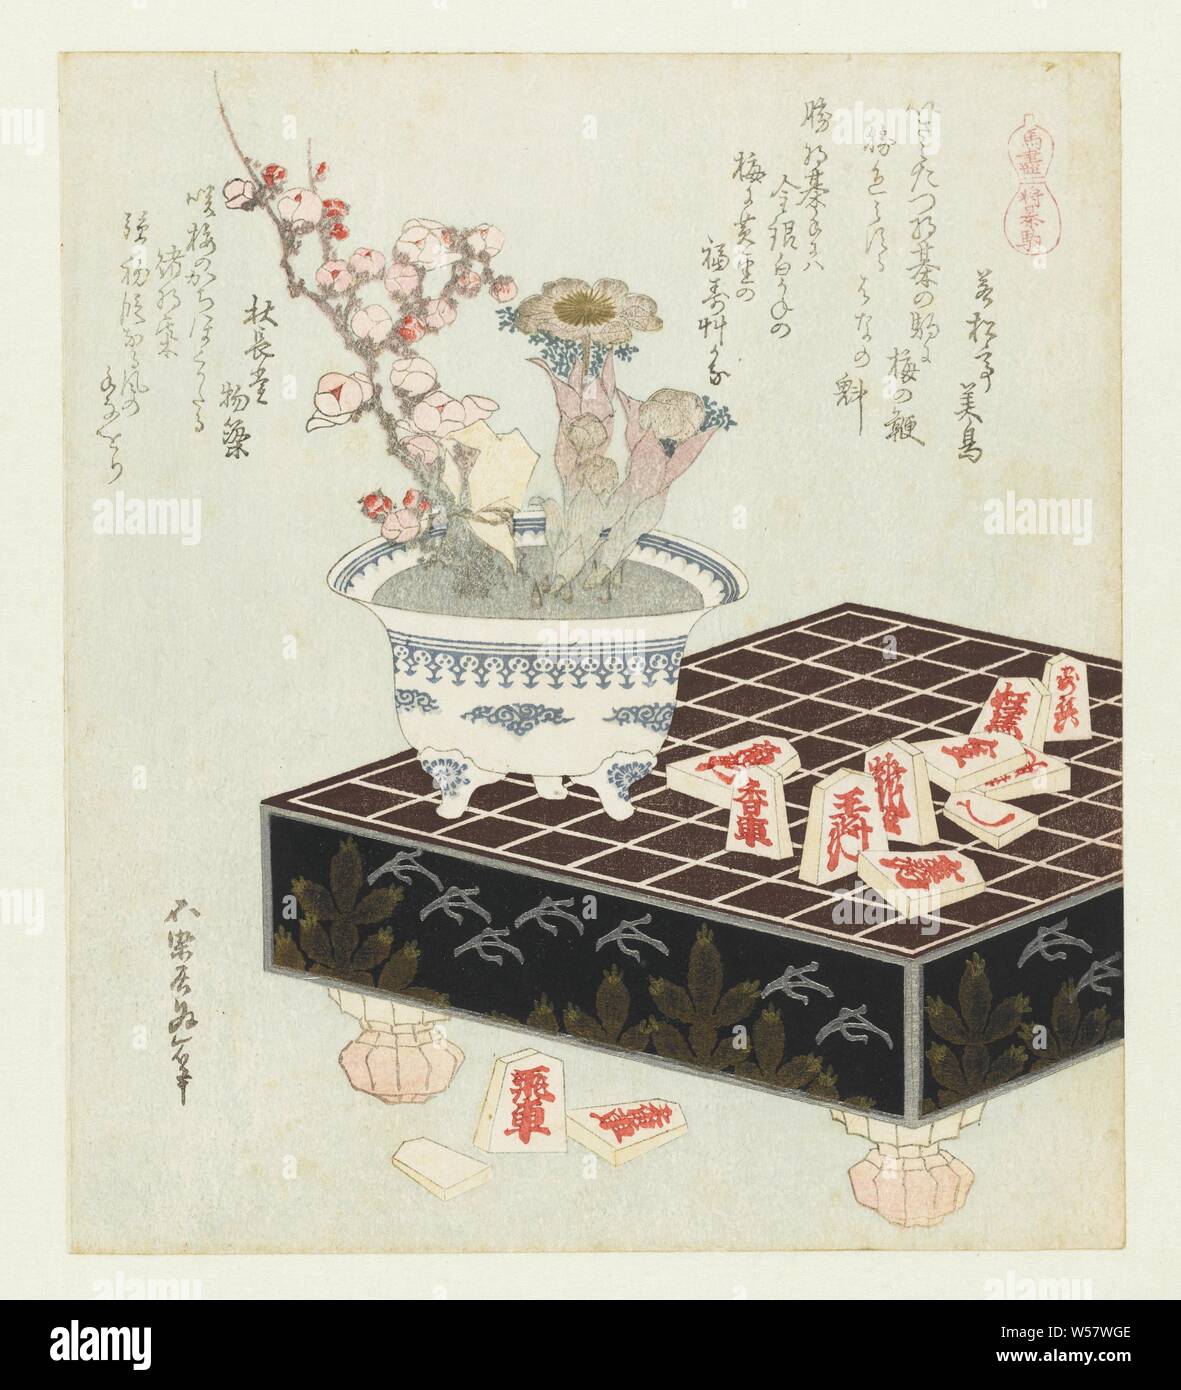 Shôgi stones Shogikoma (title on object) A series with horses (series title on object) Umazukushi (series title on object), Pot with spring anemones and dwarf plum blossom standing on a game board of a Japanese variant of chess, shogi. The stones in this game are also called 'horses', hence this design in this series, published for the new year of the horse in 1822. With two poems., Katsushika Hokusai (mentioned on object), Japan, 1822, paper, colour woodcut, h 206 mm × w 184 mm Stock Photo